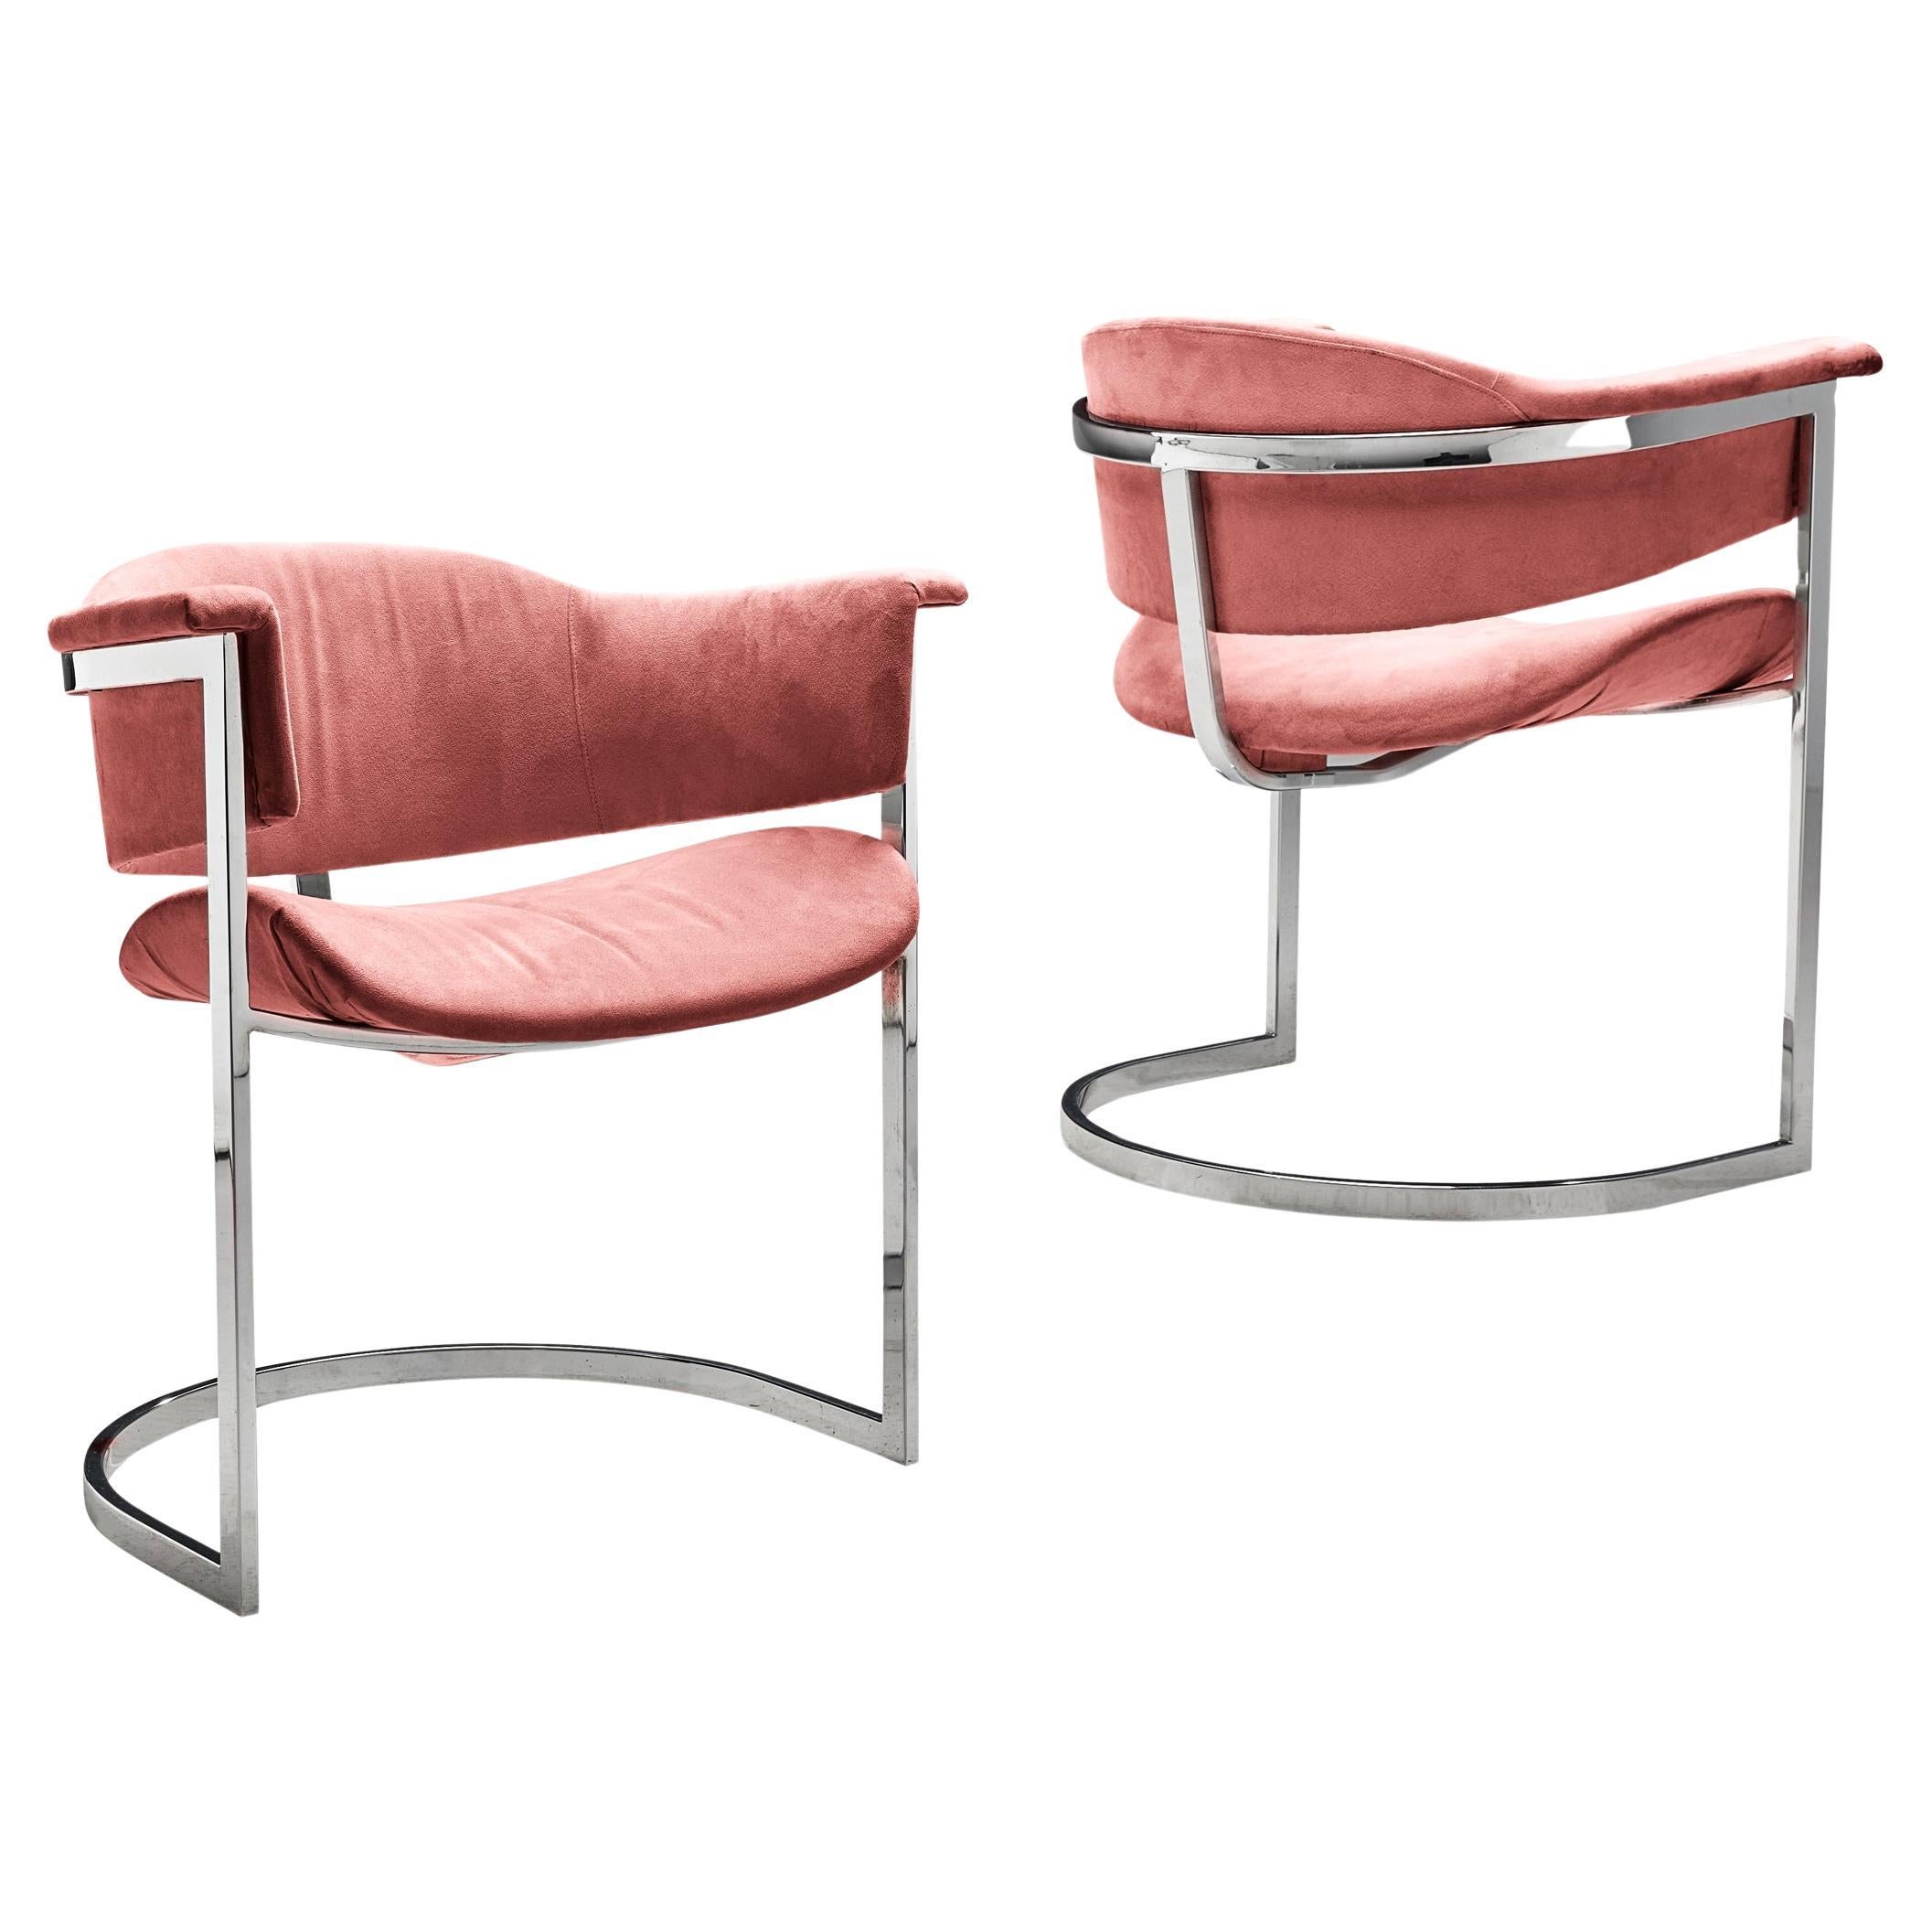 Vittorio Introini for Mario Sabot Pair of Dining Chairs in Dusty Pink 